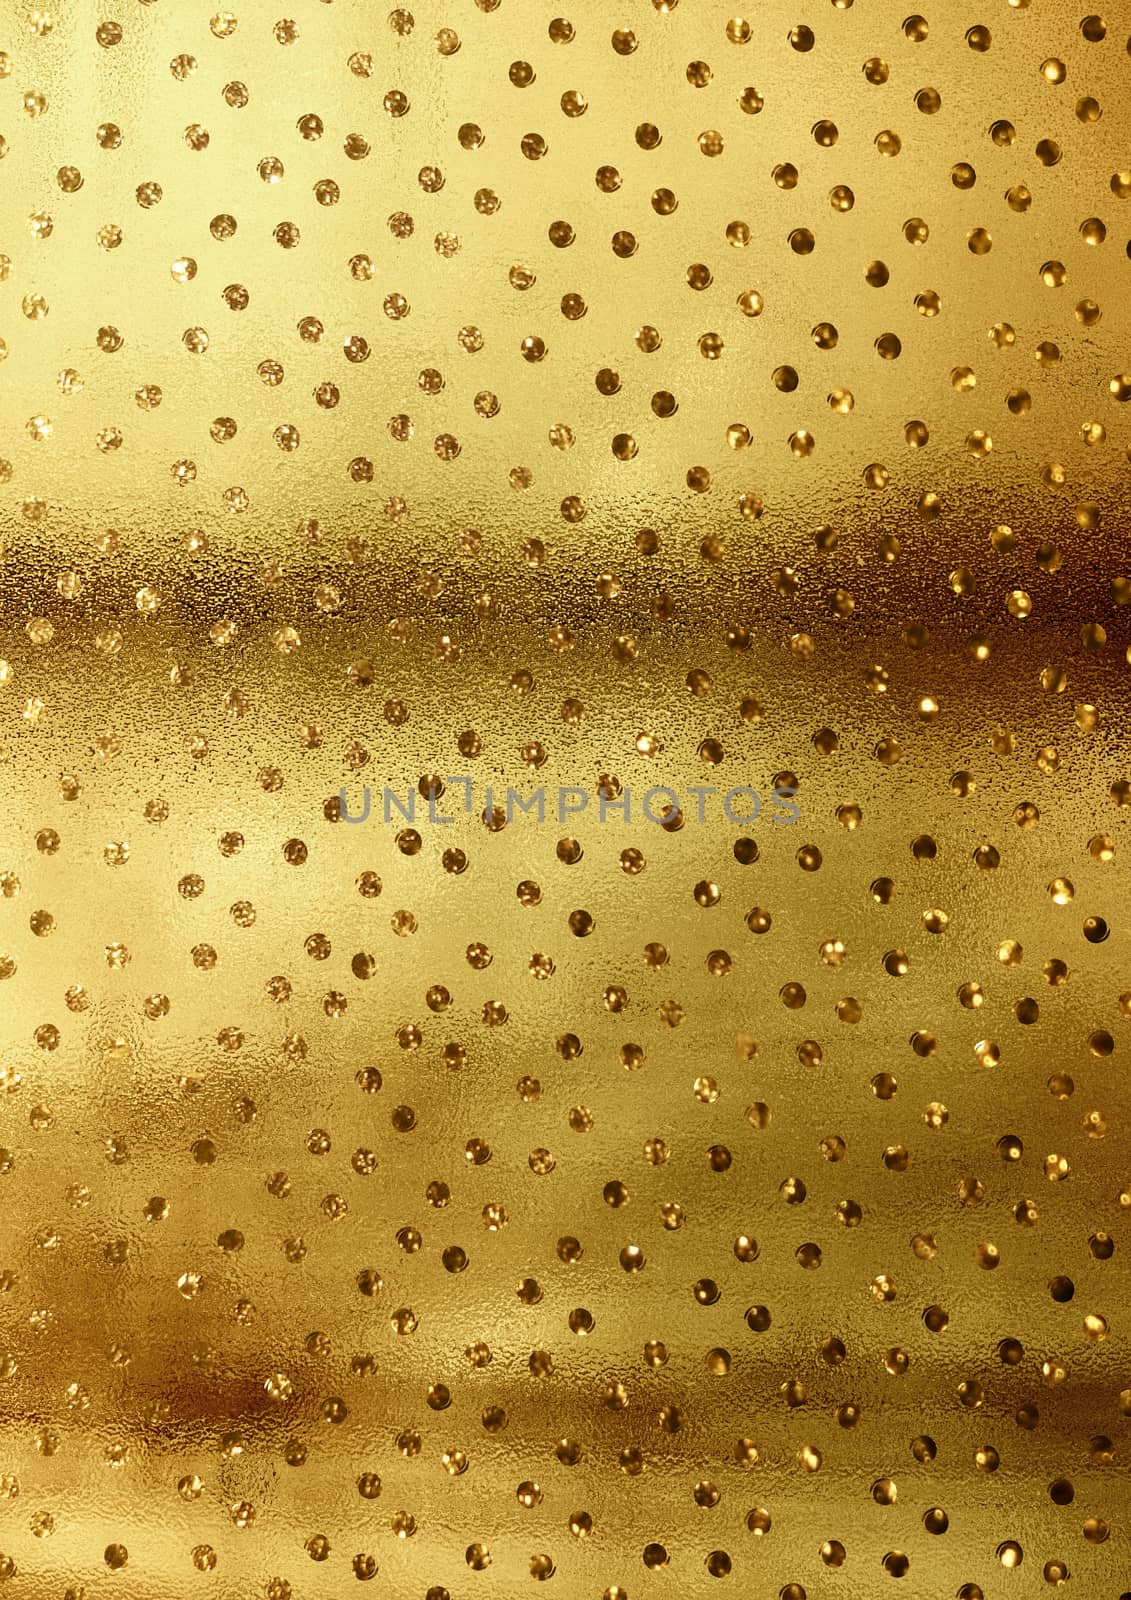 Crumped golden paper background with glitter pattern by cougarsan